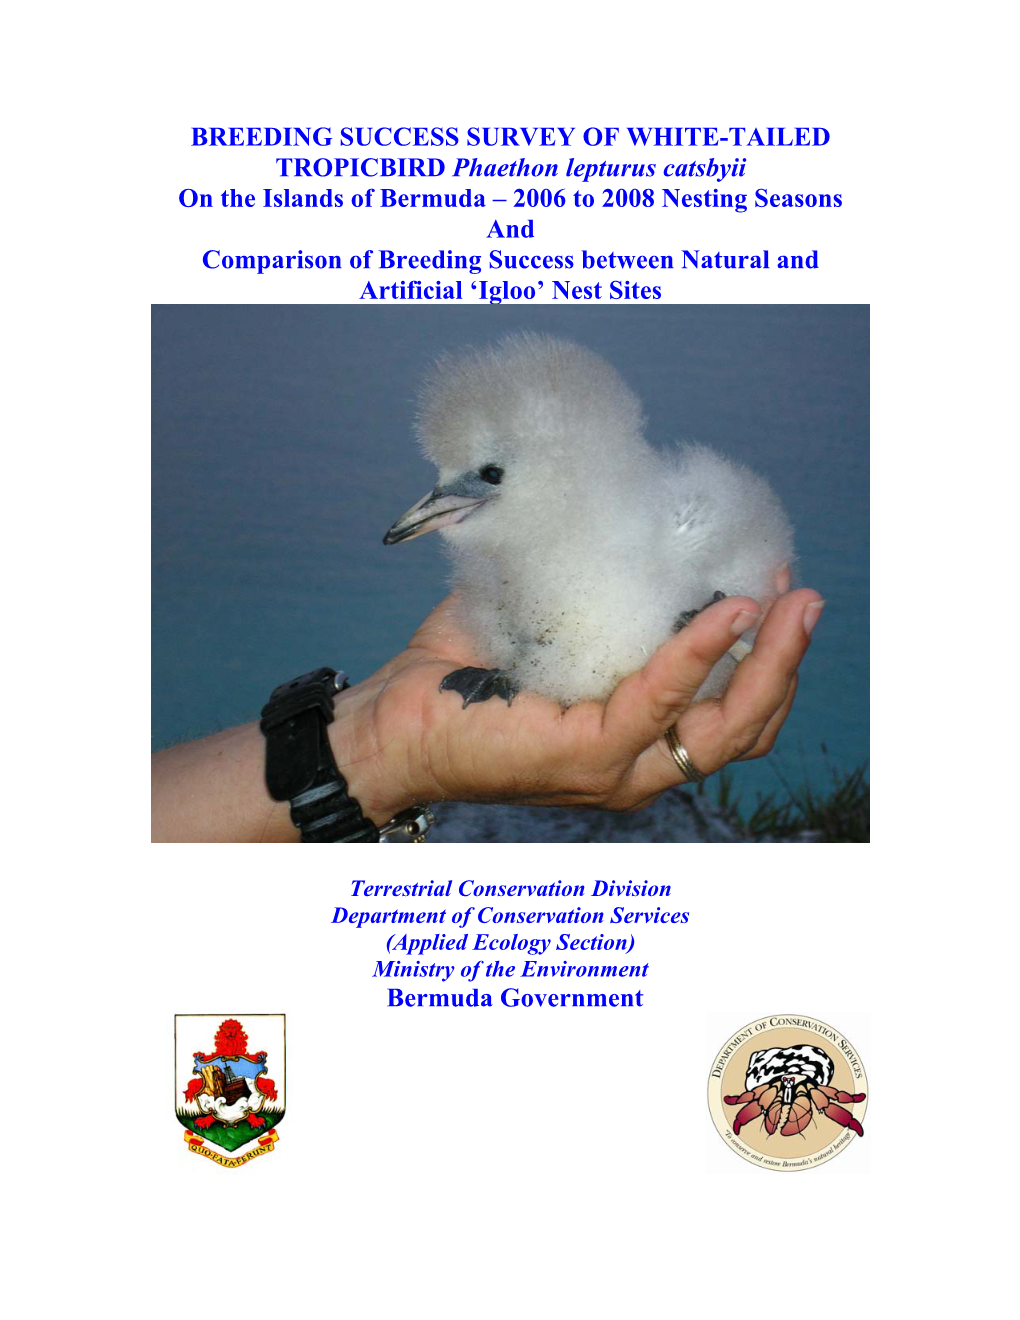 Growth Records for Tropicbird Chicks